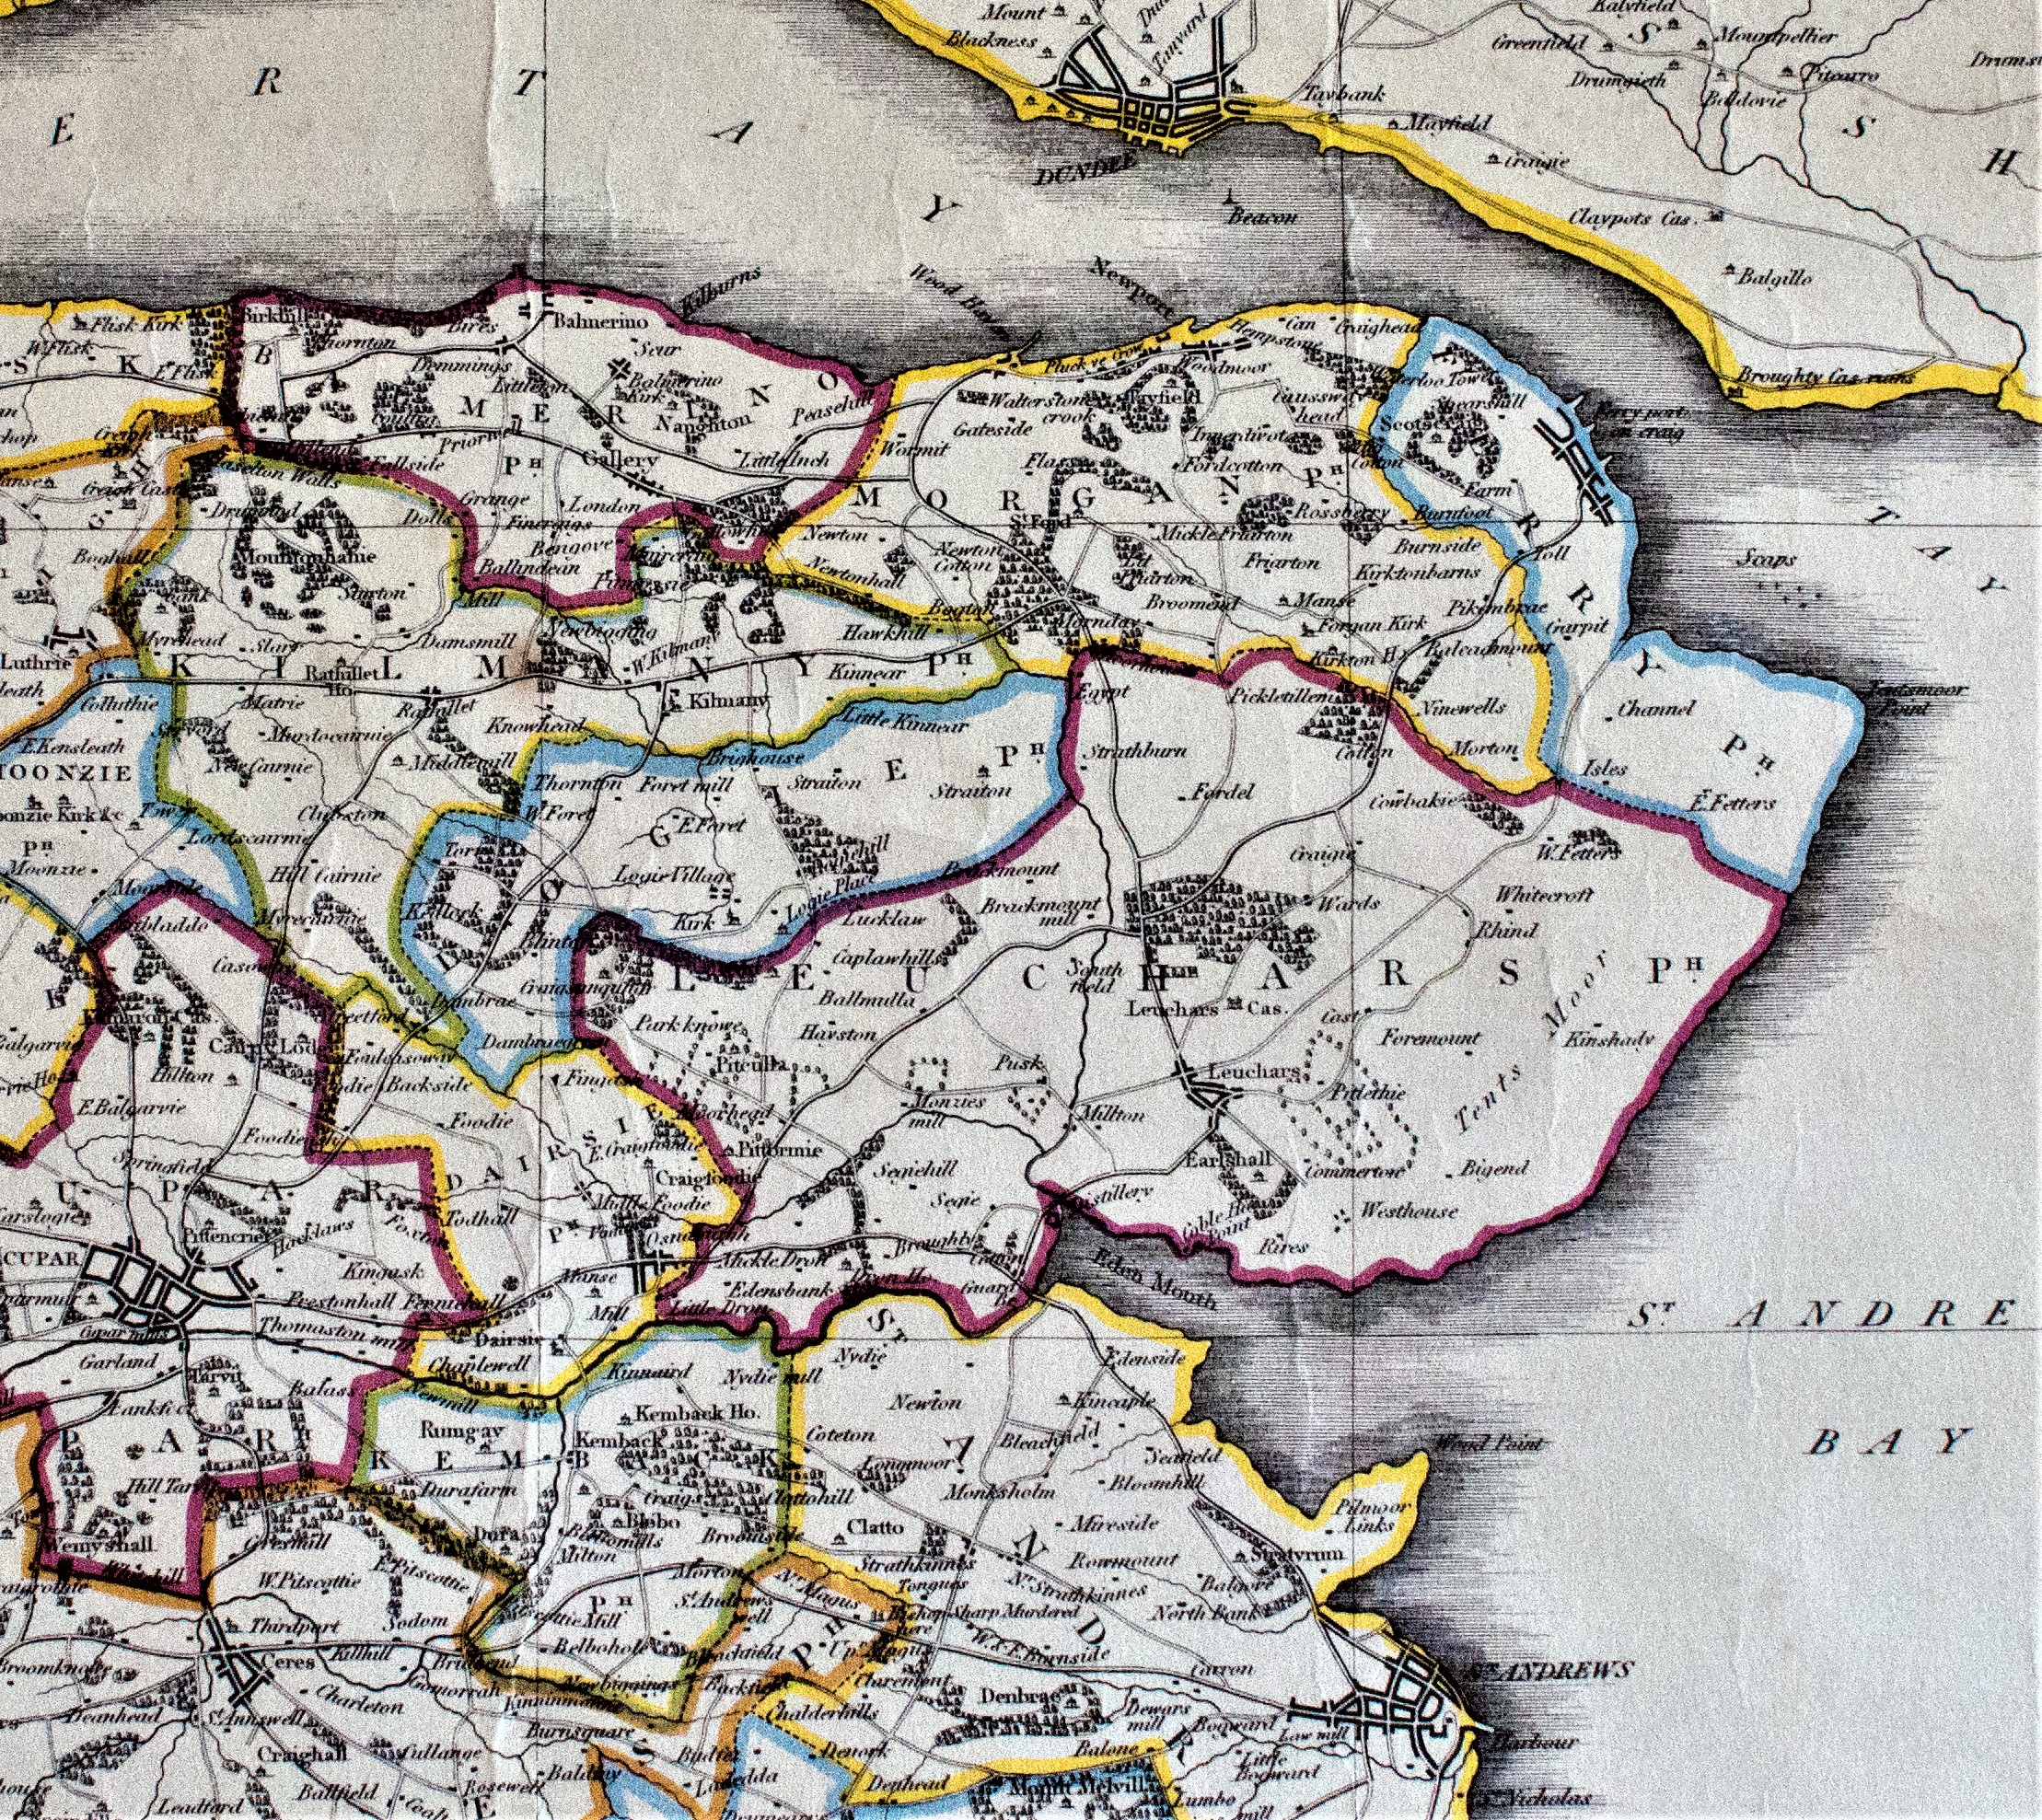 1827 Ainslie & Bell Map prior to Newport coastal road formation